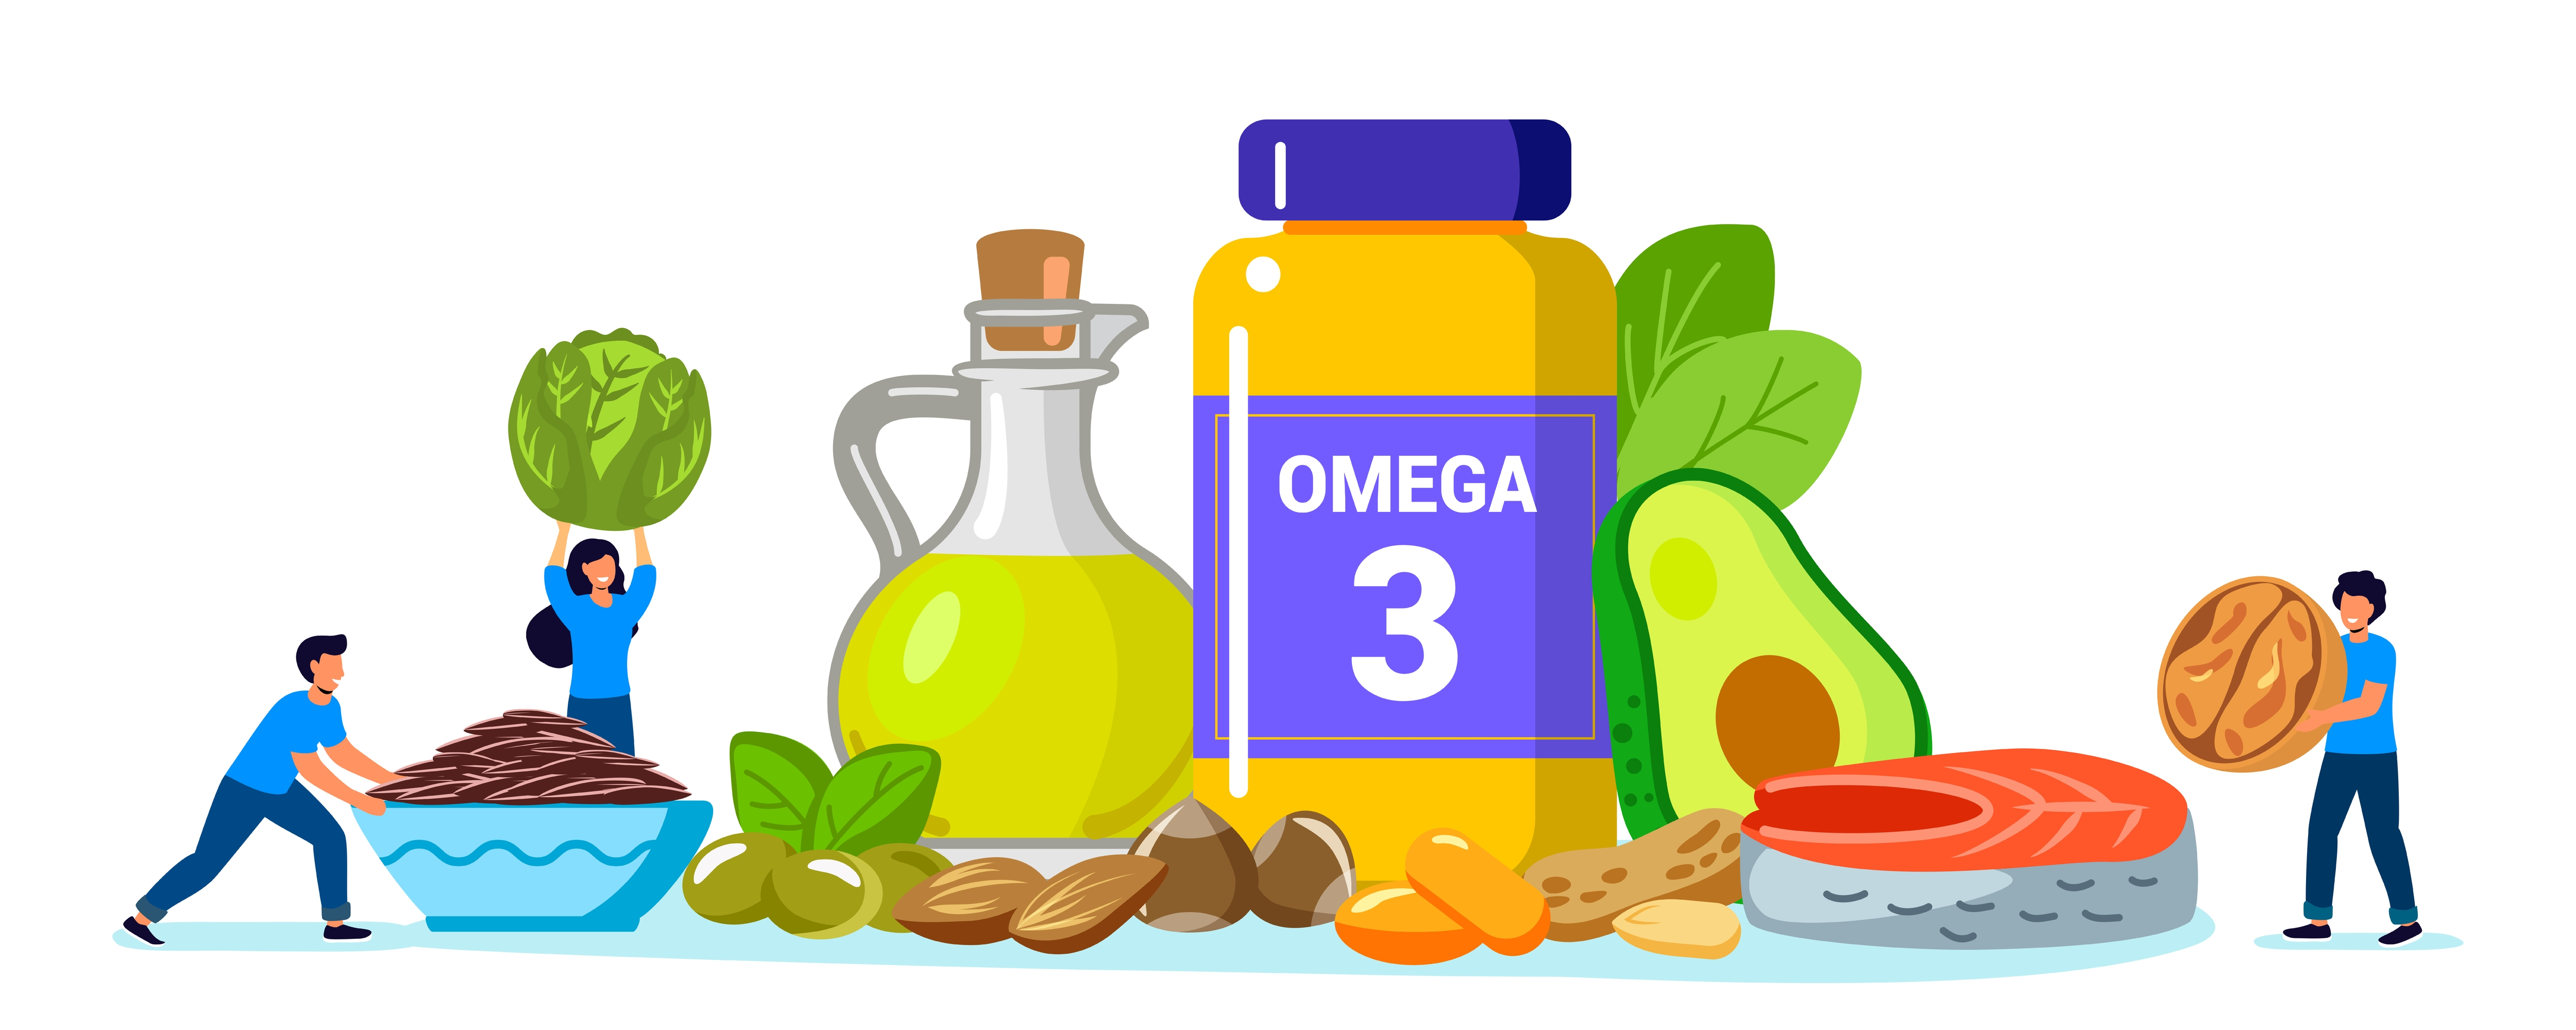 omega 3 fatty acids,fish oil supplements, pregnant women, dha supplements, fish oil supplement, how much dha during pregnancy 